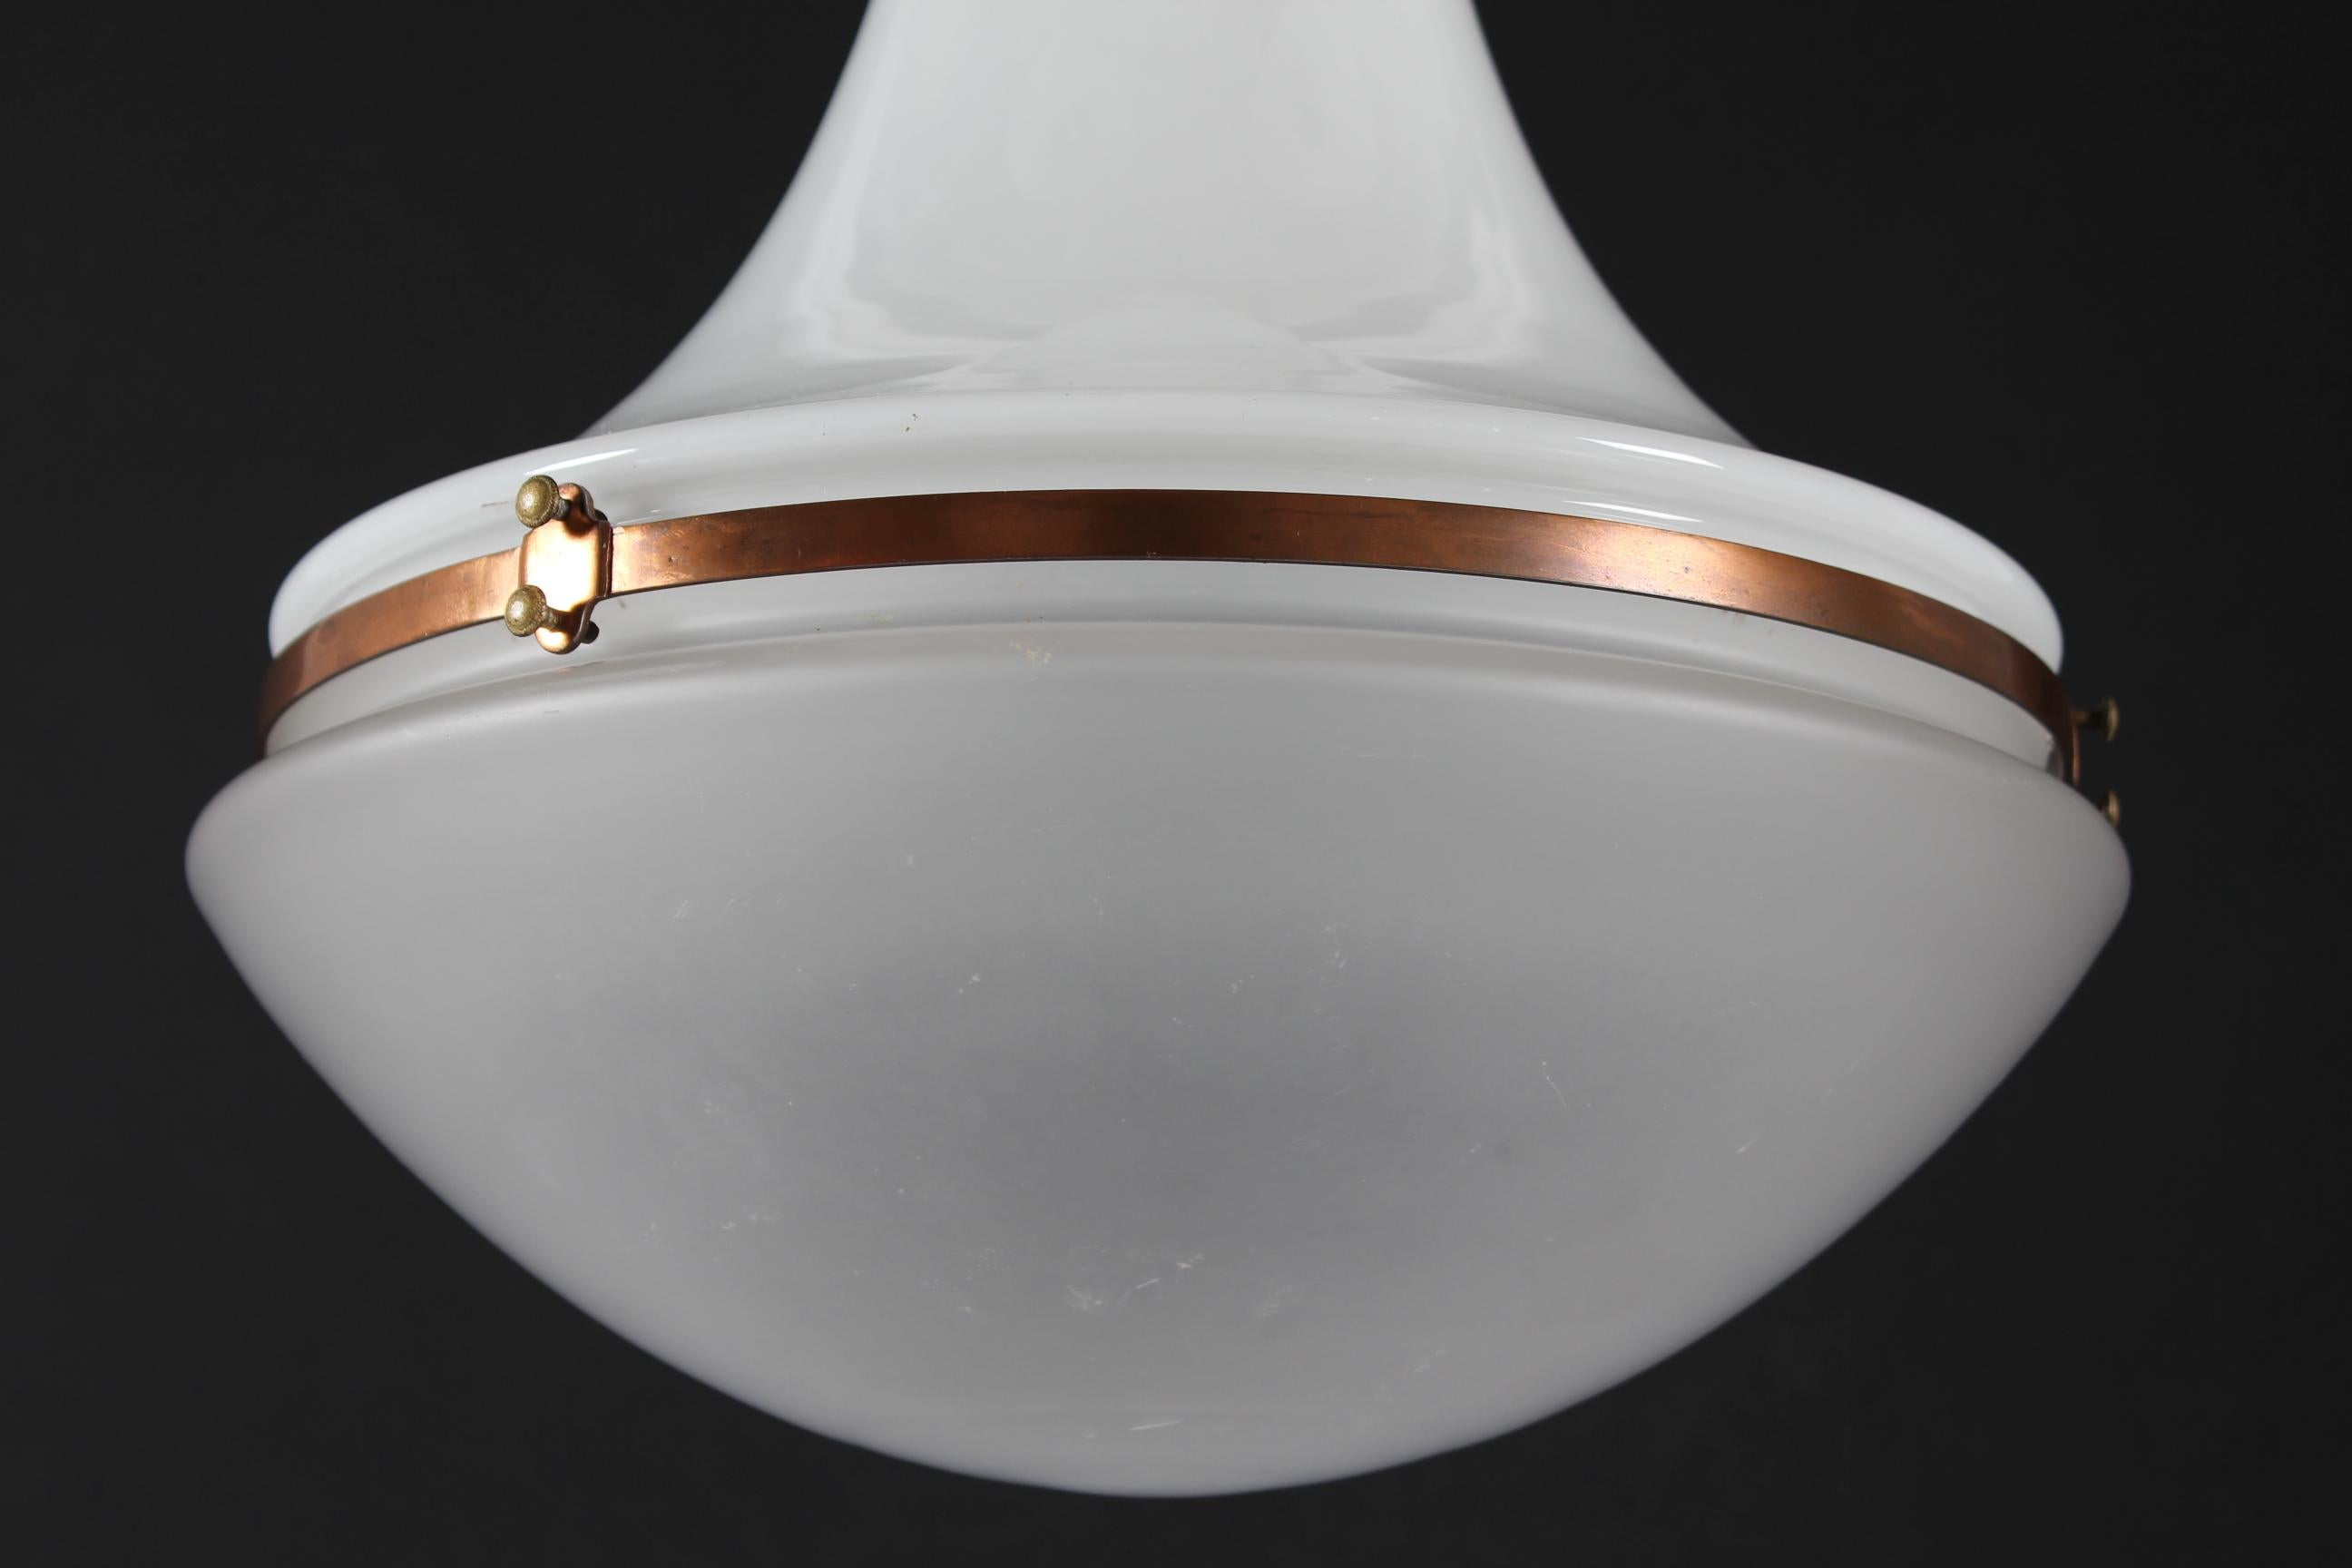 Large version Luzette pendent designed by Peter Behrens in 1908 for Siemens-Schuckert.
The pendant has a combined lower shade of frosted glass with upper shade of milk white opaline glass. The shade has copper fittings.

Measurements:
Height ca.